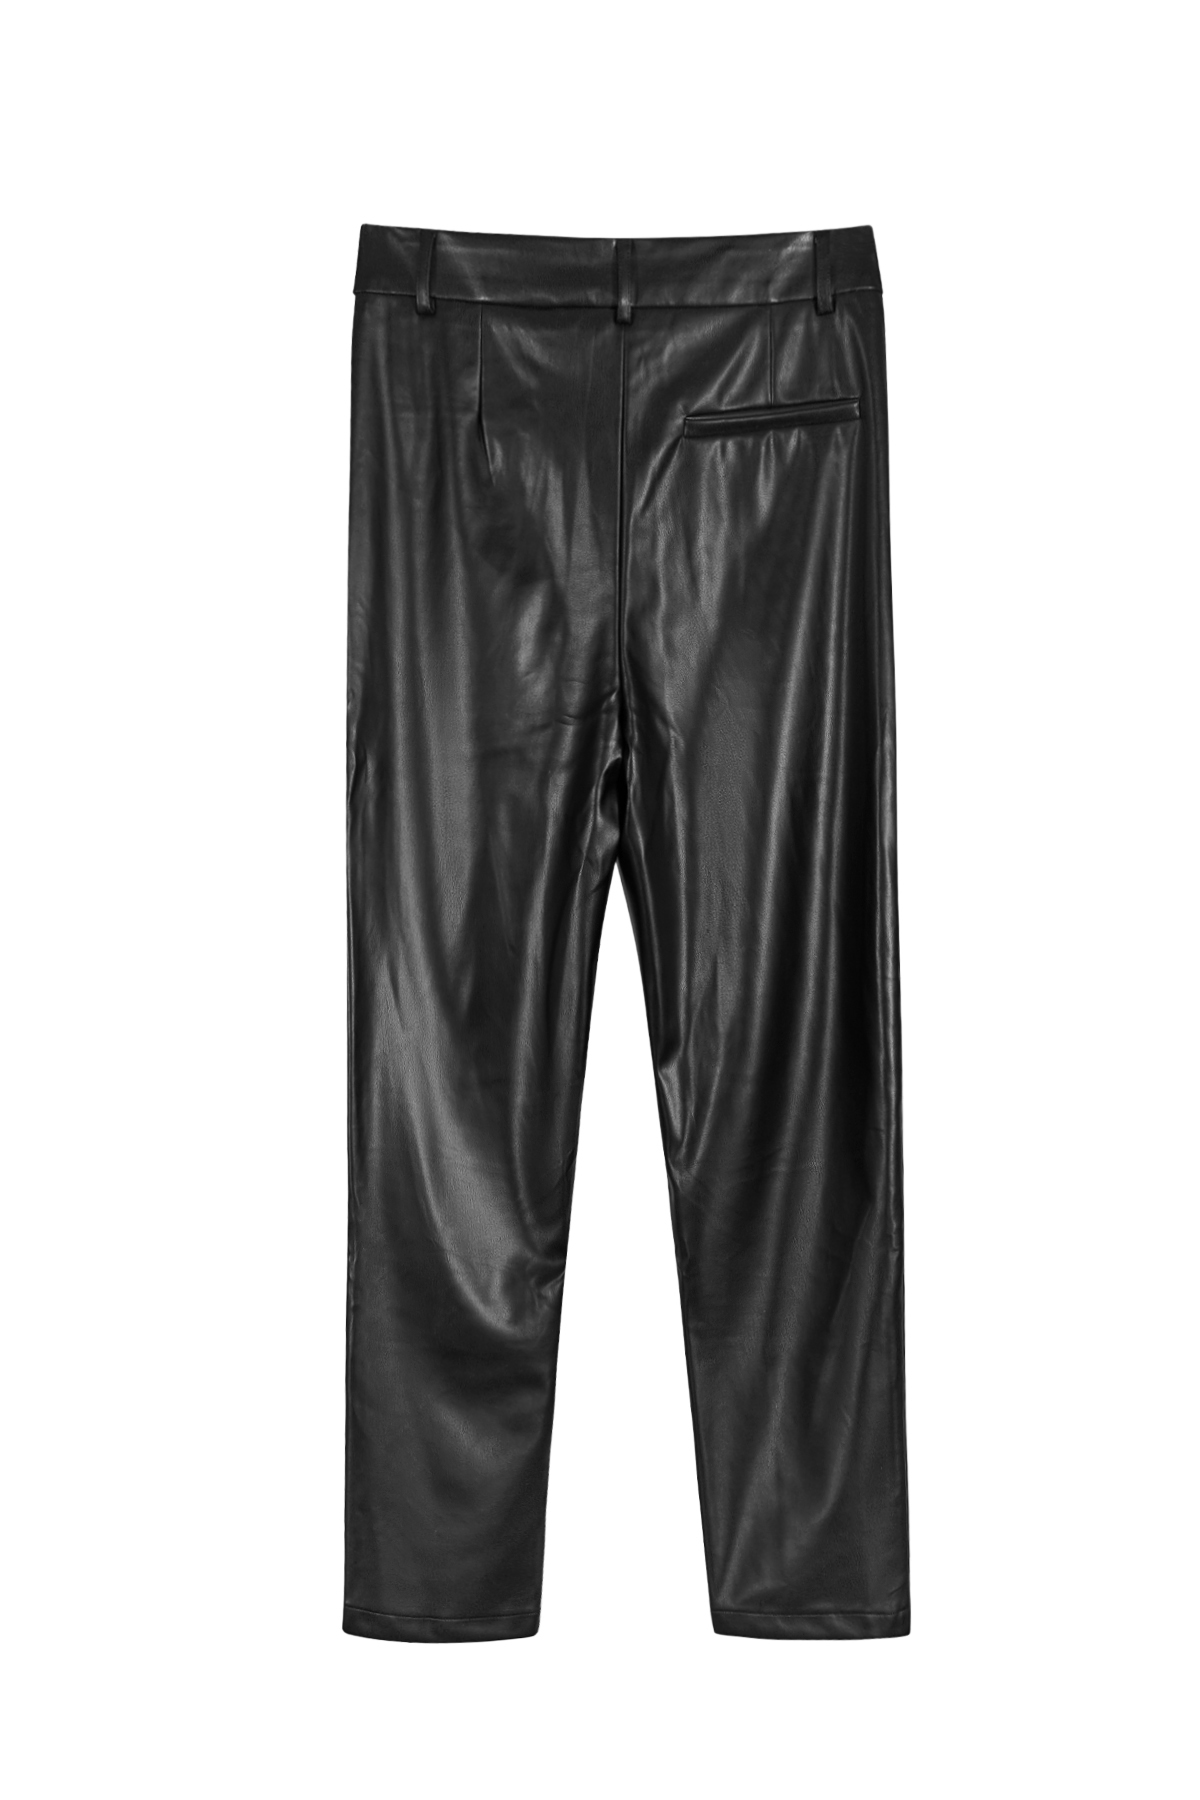 PU leather pants - black h5 Picture7